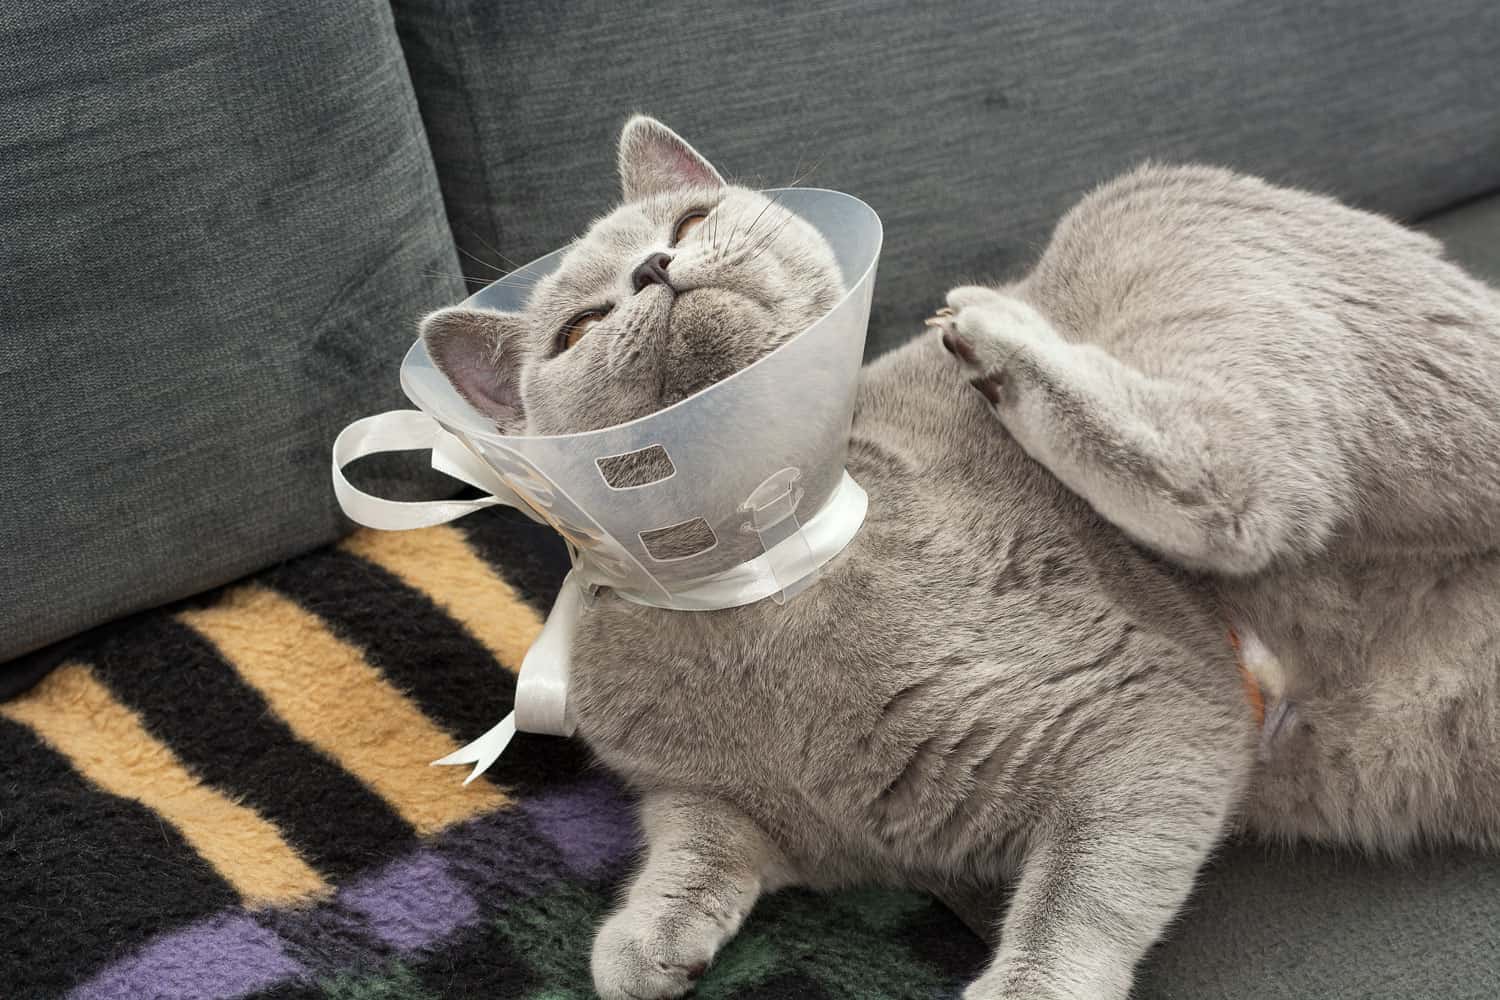 A British Shorthair cat lies on a sofa in a plastic collar after an umbilical hernia surgery. The cat tries to get rid of the collar and itches with its hind paw. A bandage is visible on the abdomen.
